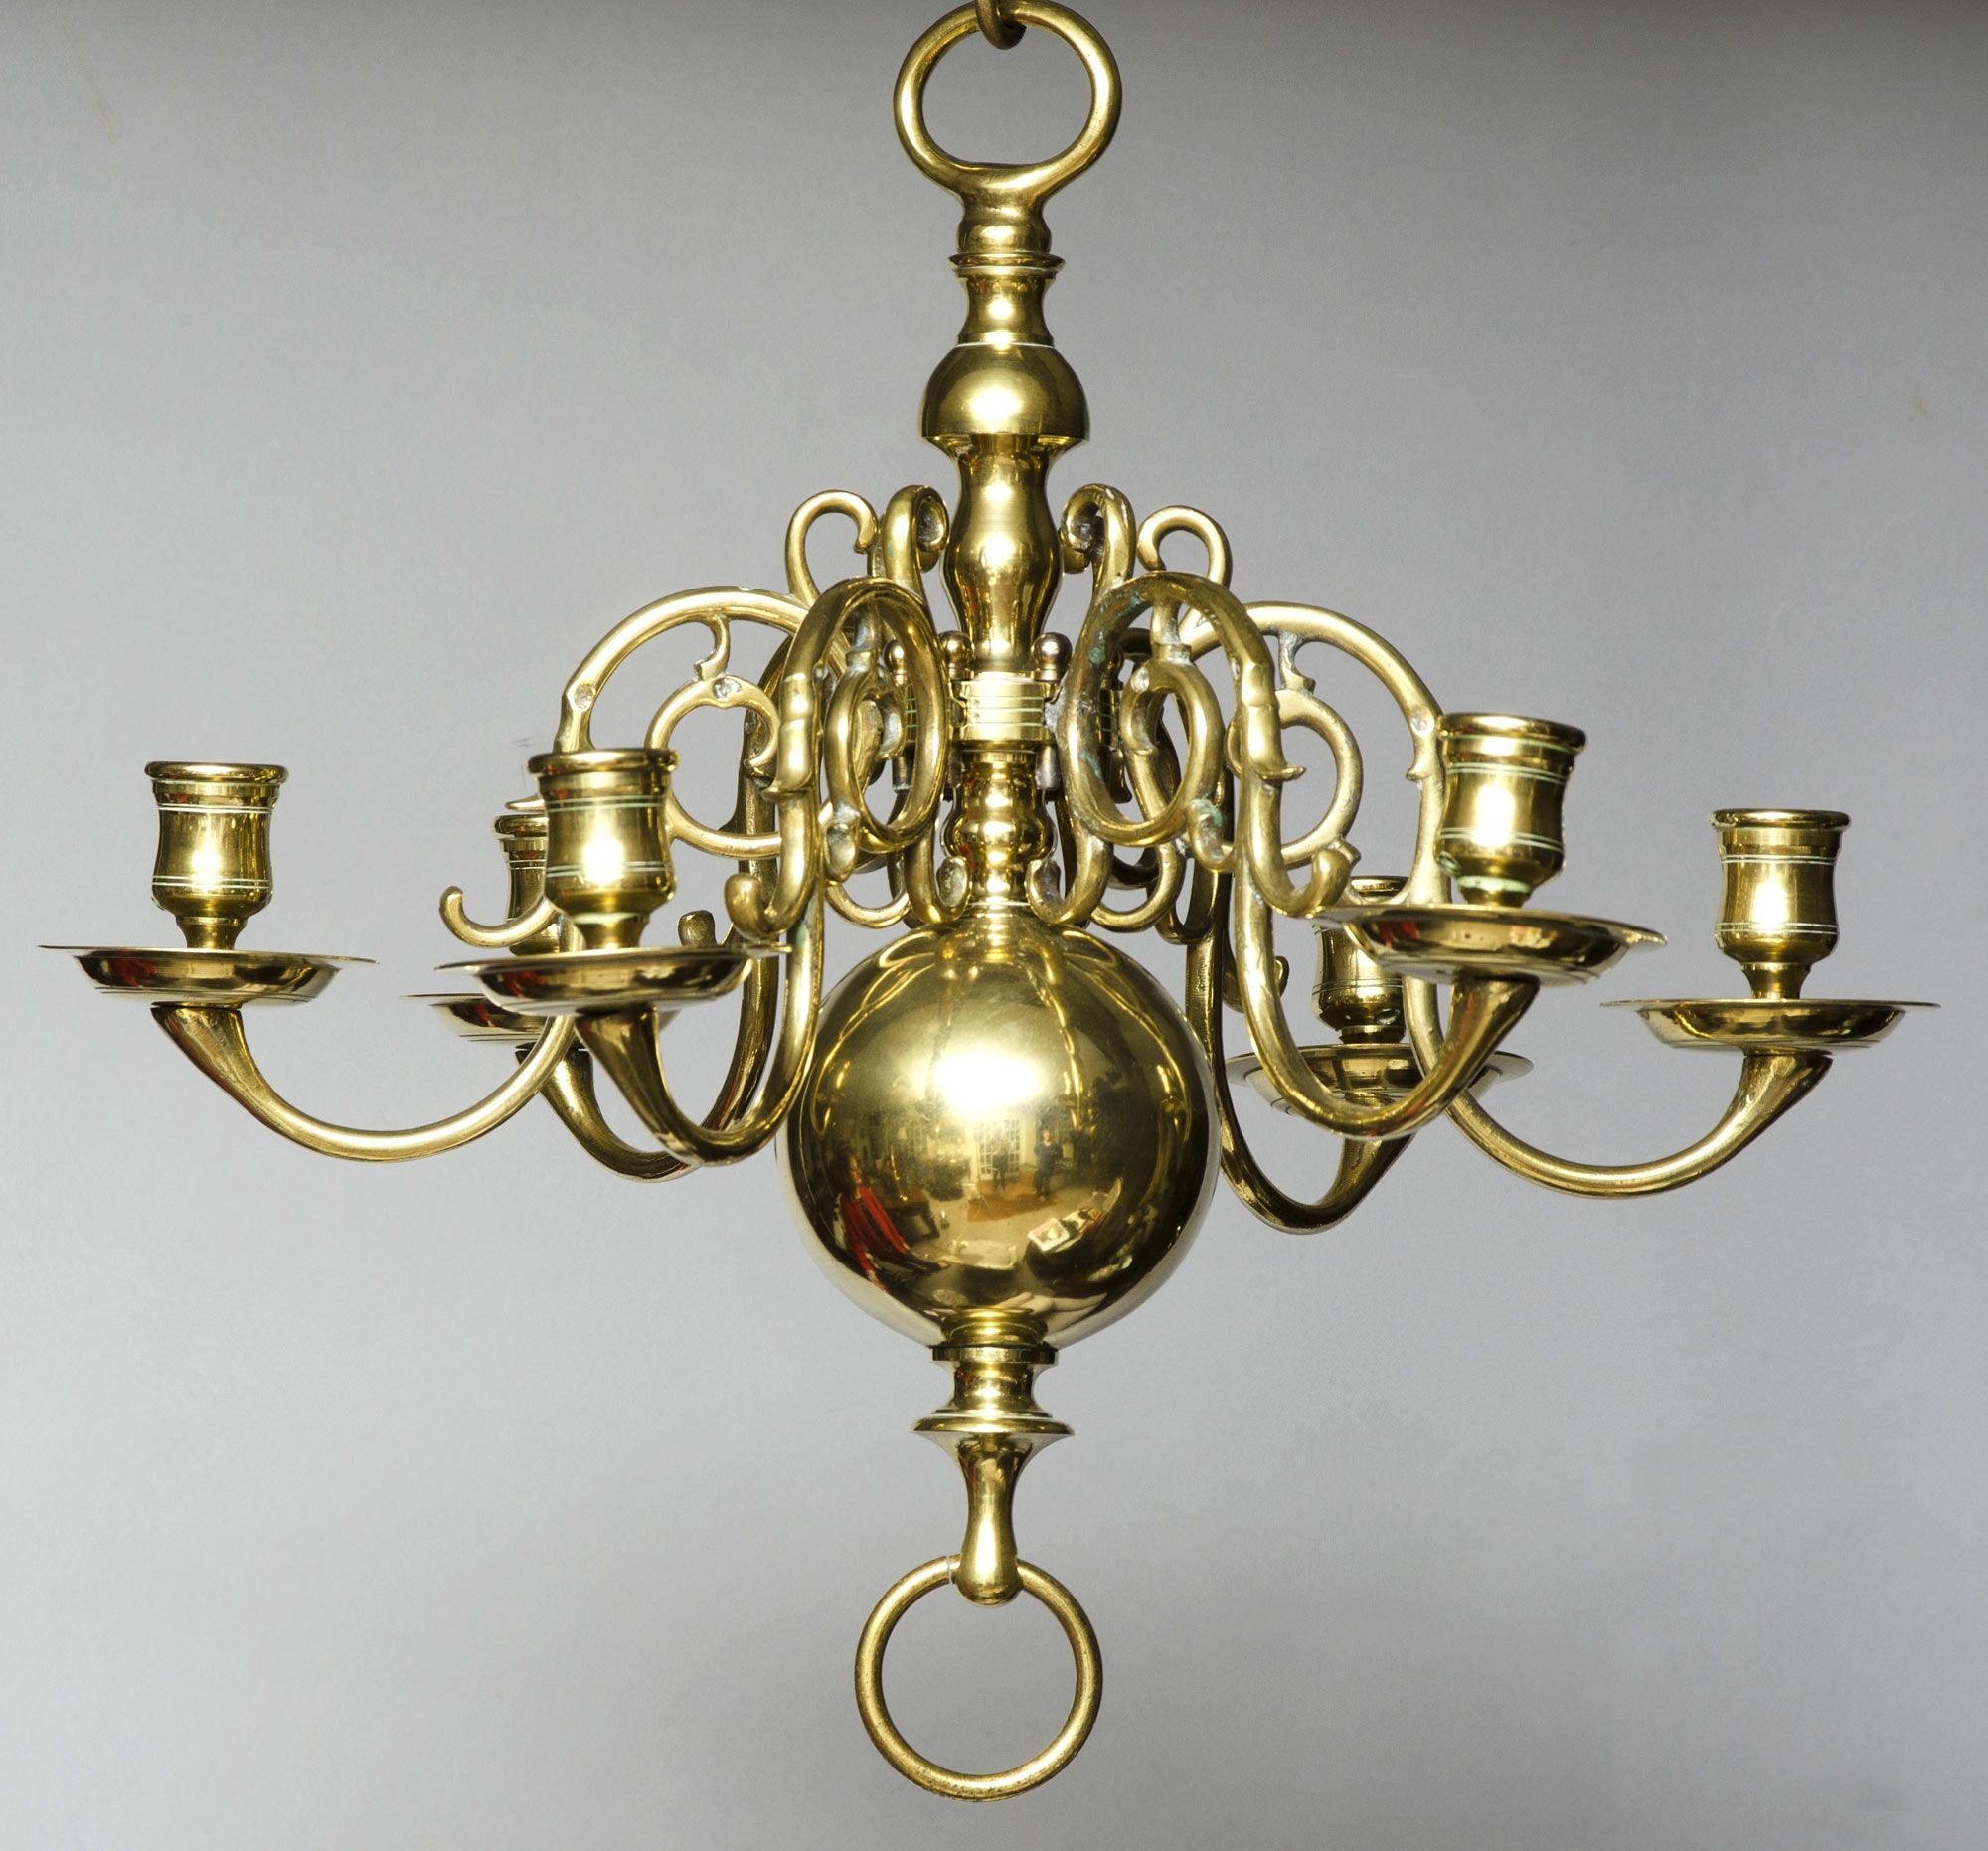 Famous Old Brass Chandelier Regarding Product » Small Dutch Brass Chandelier (View 3 of 15)